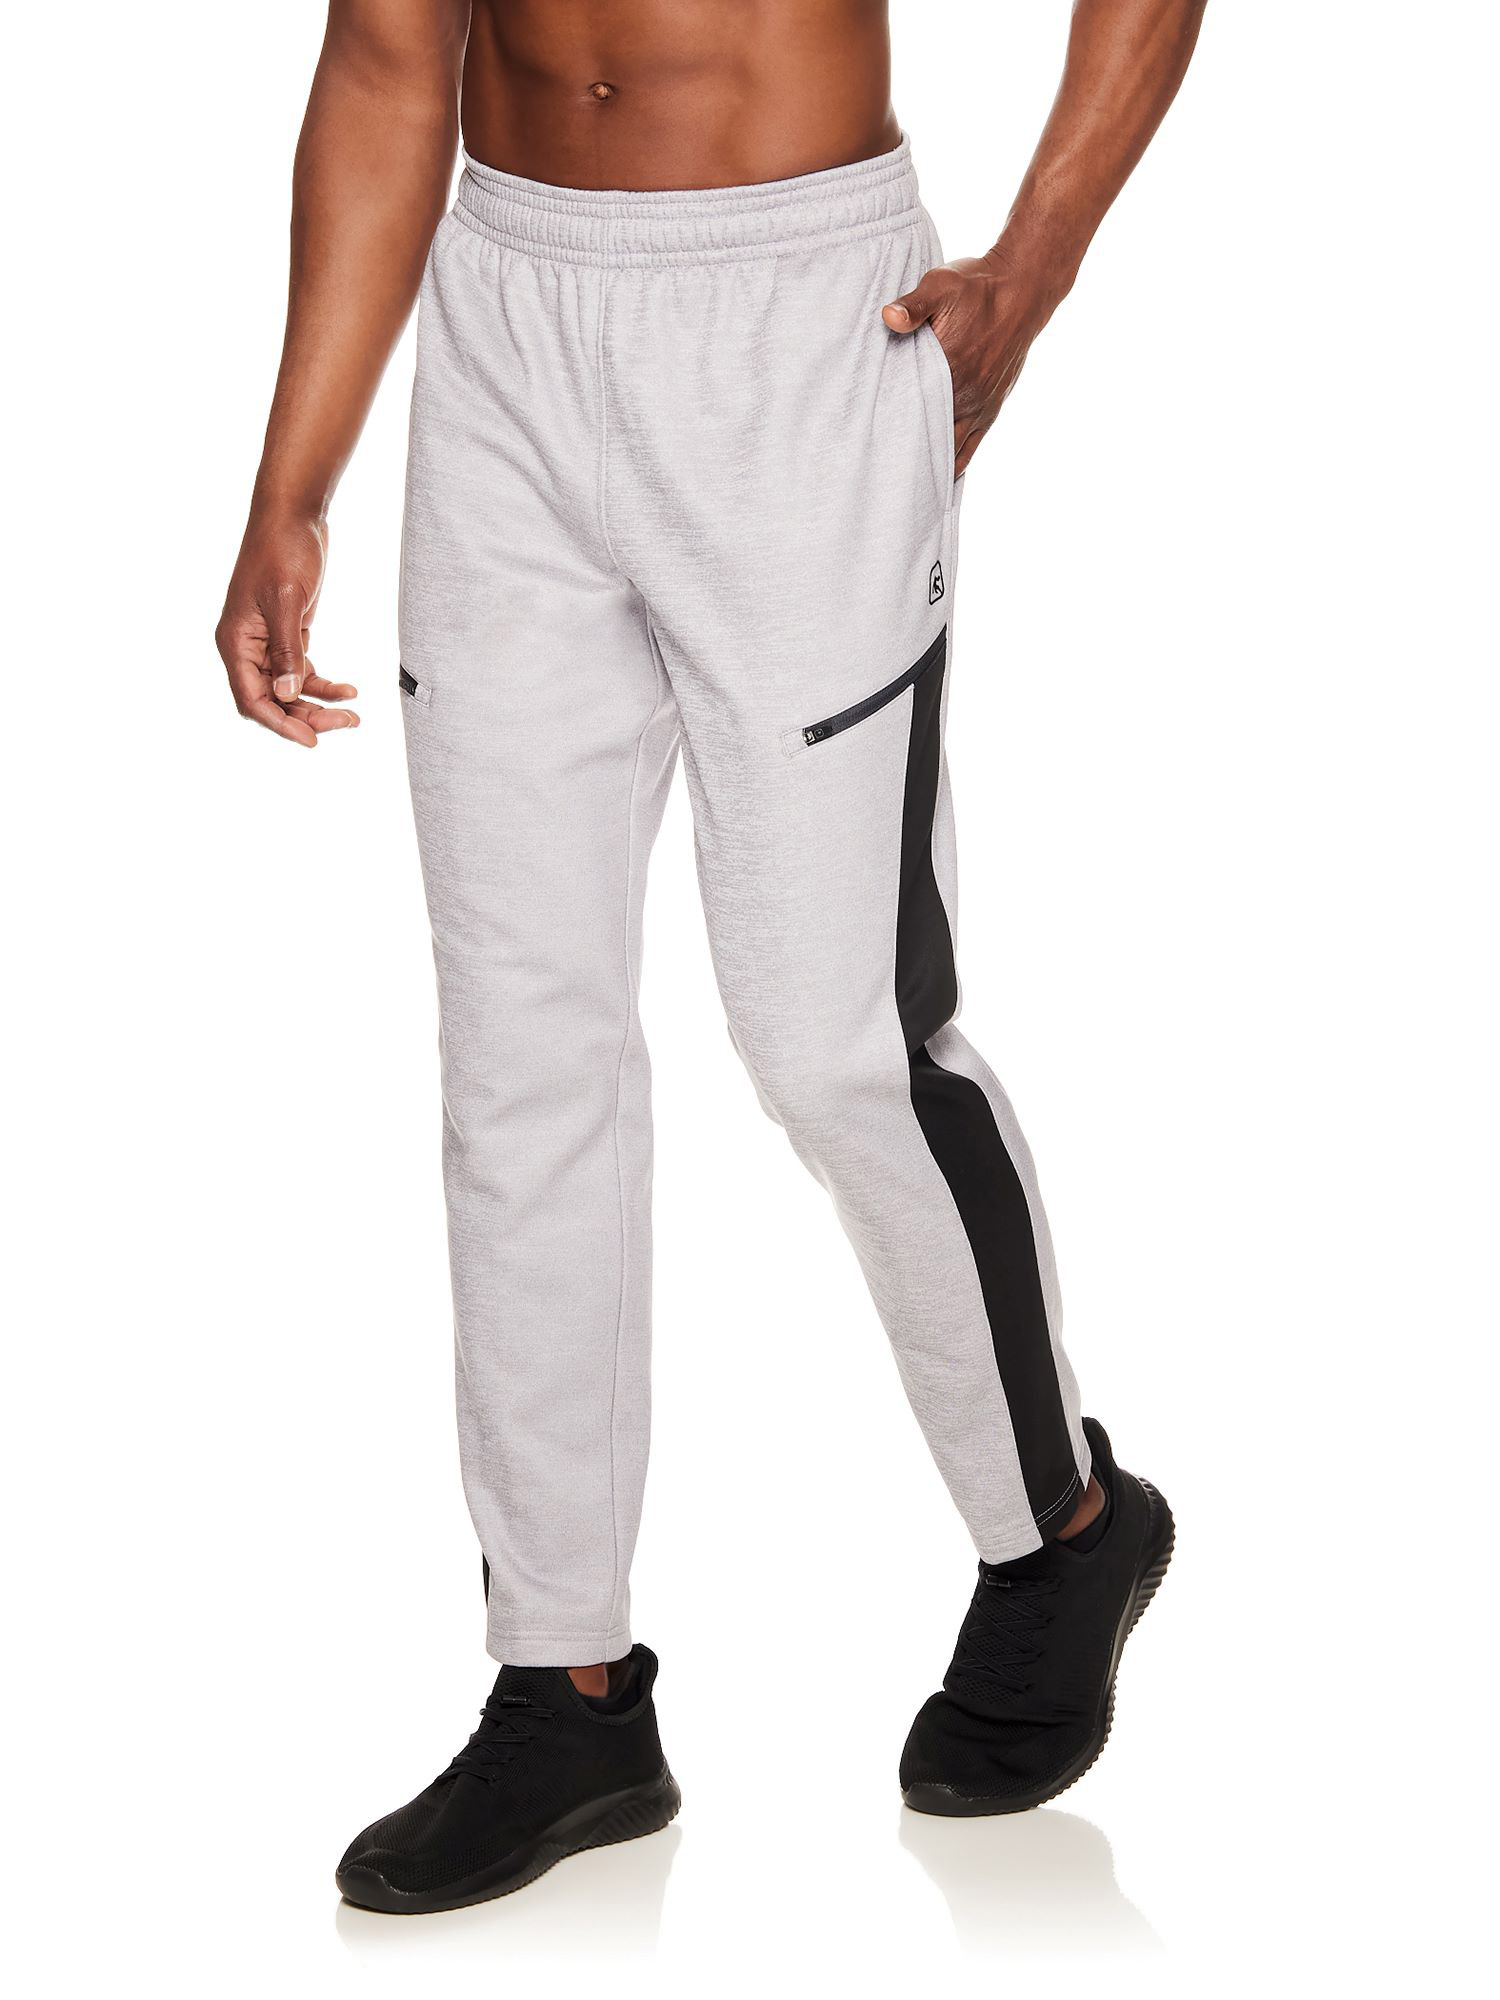 And1 Men's and Big Men's Deflection Pants, Sizes S-5X - image 3 of 4